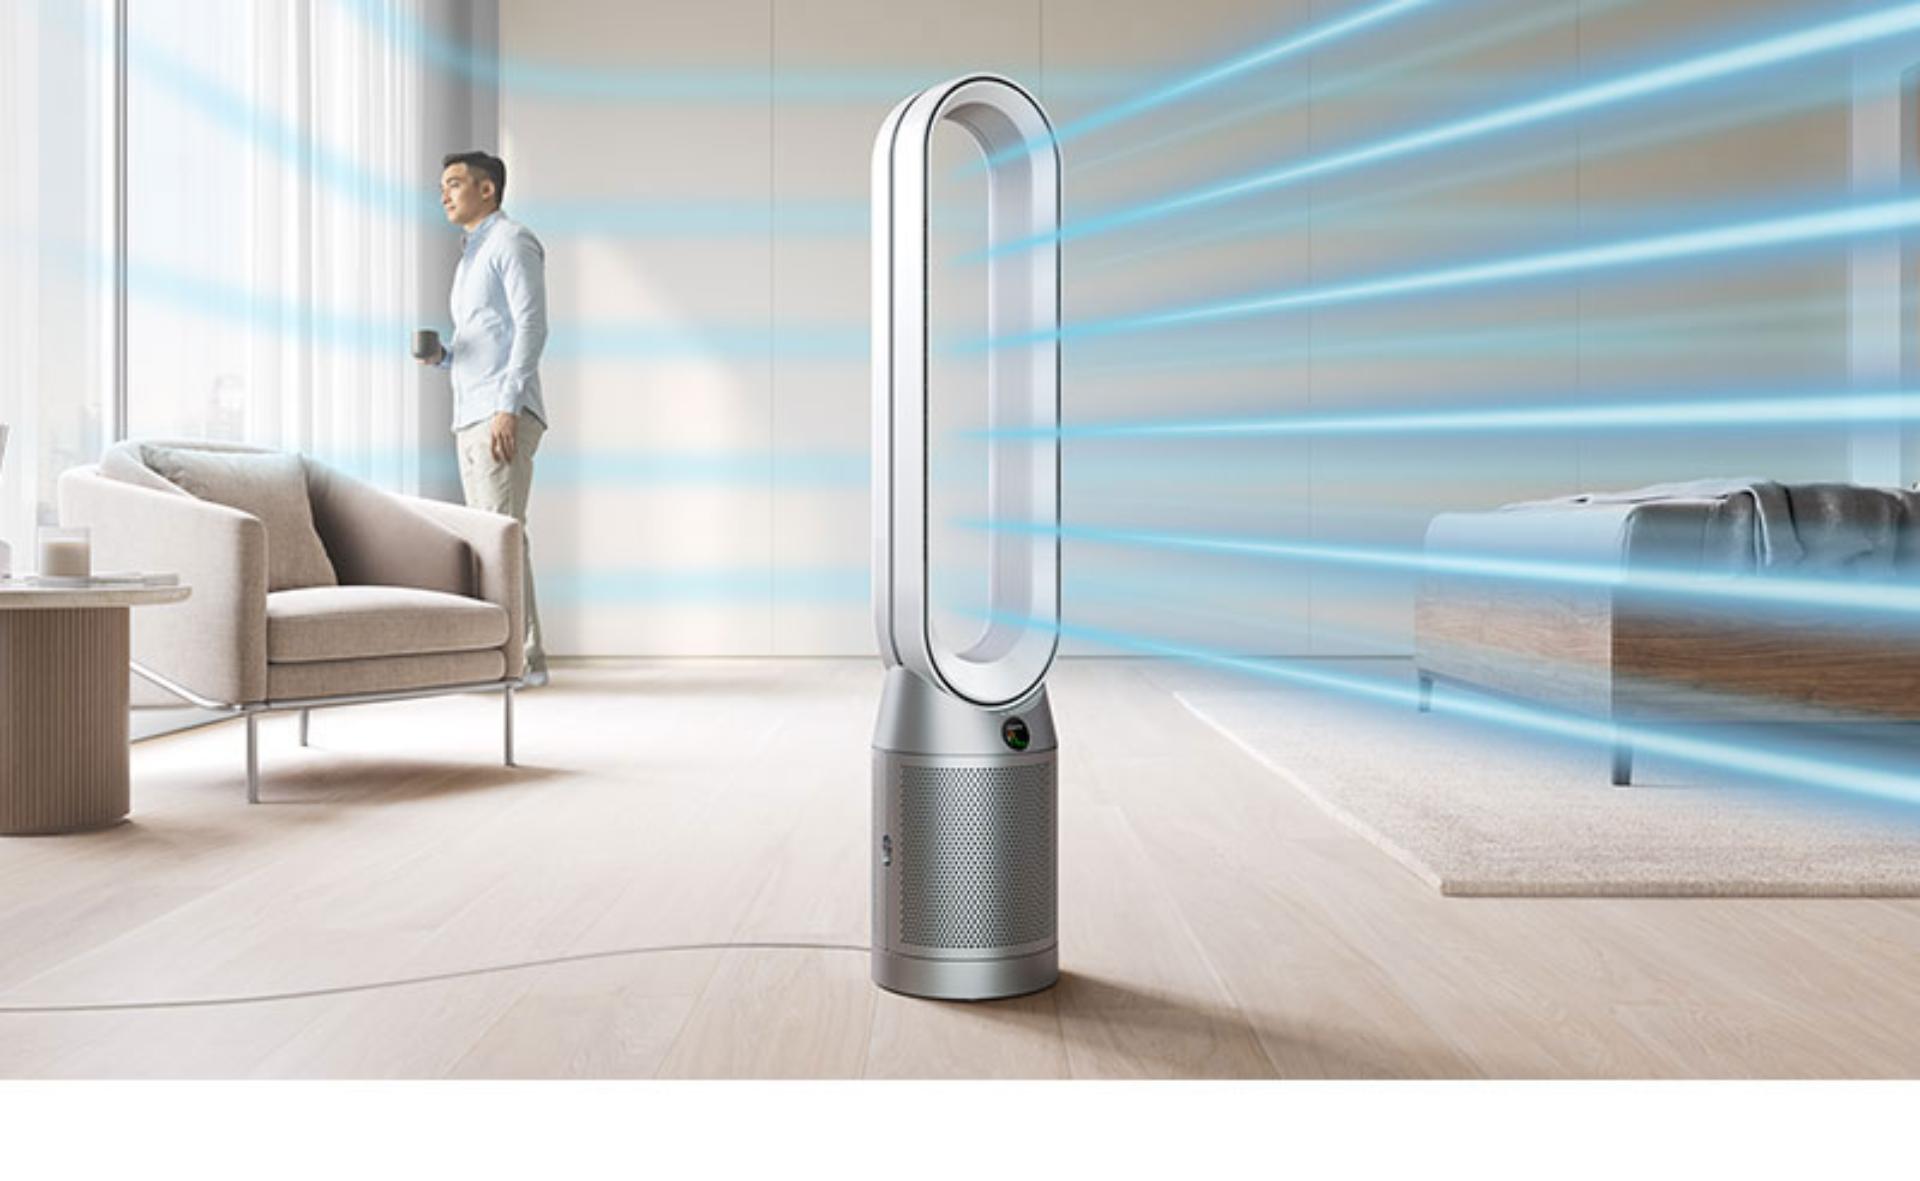 Dyson purifier in a living space